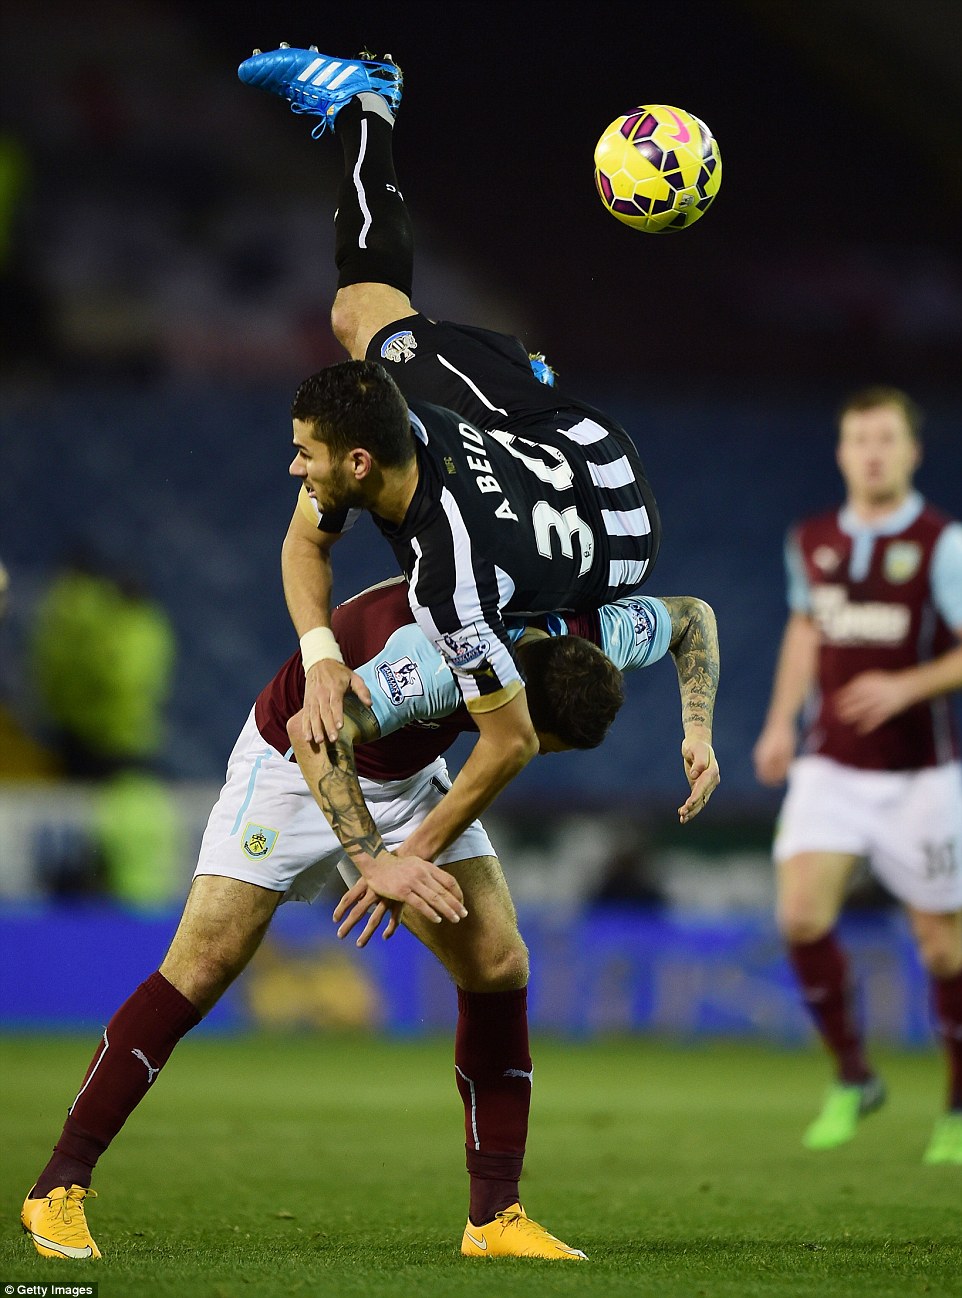 Newcastle United's Mehdi Abeid takes a spectacular tumble after contesting for the ball with Burnley's Danny Ings